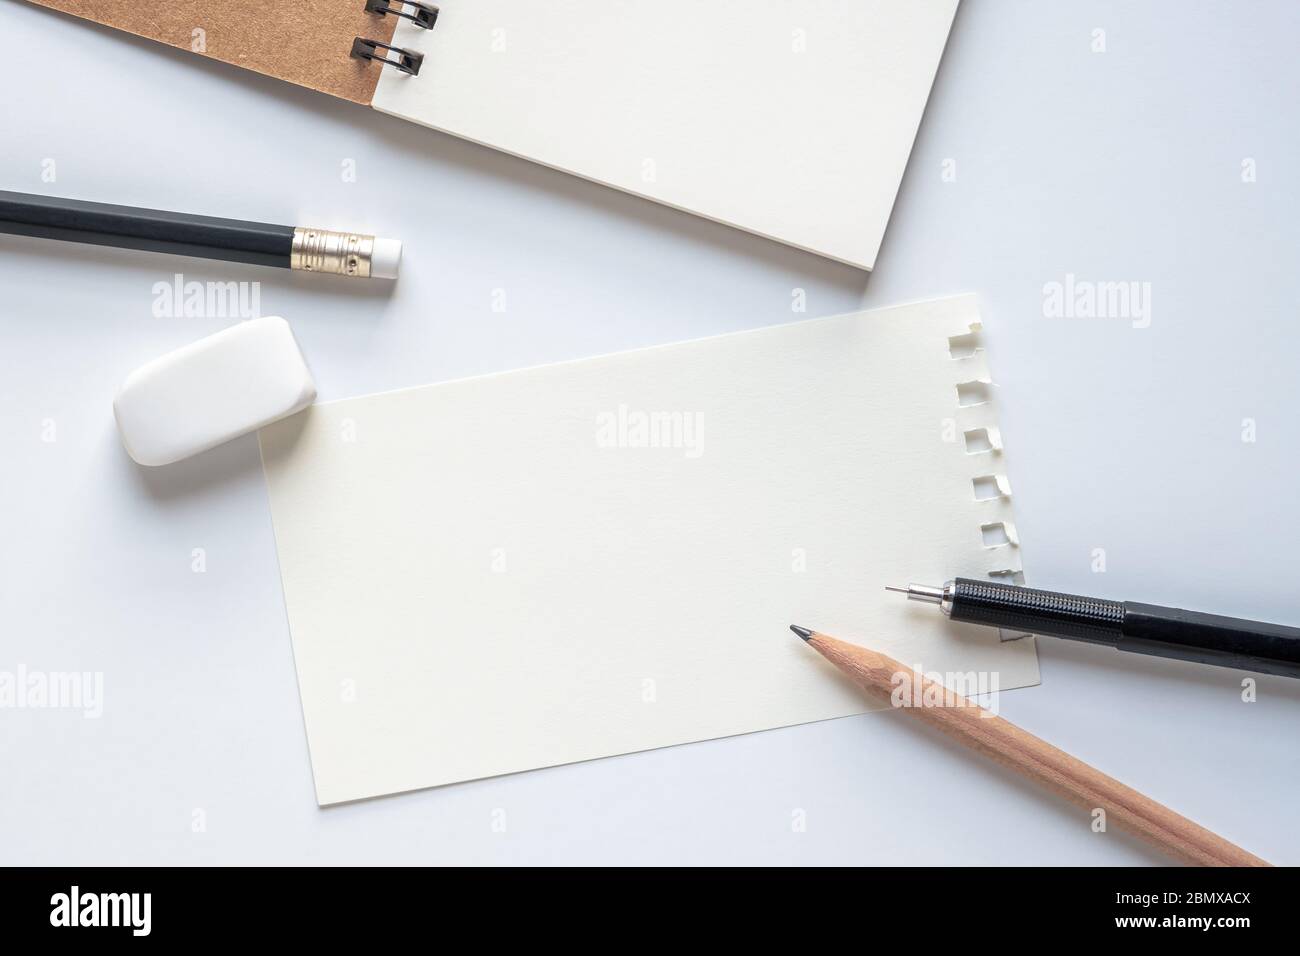 blank sketchbook and pencils for drawing on brown artistic background top  view Stock Photo